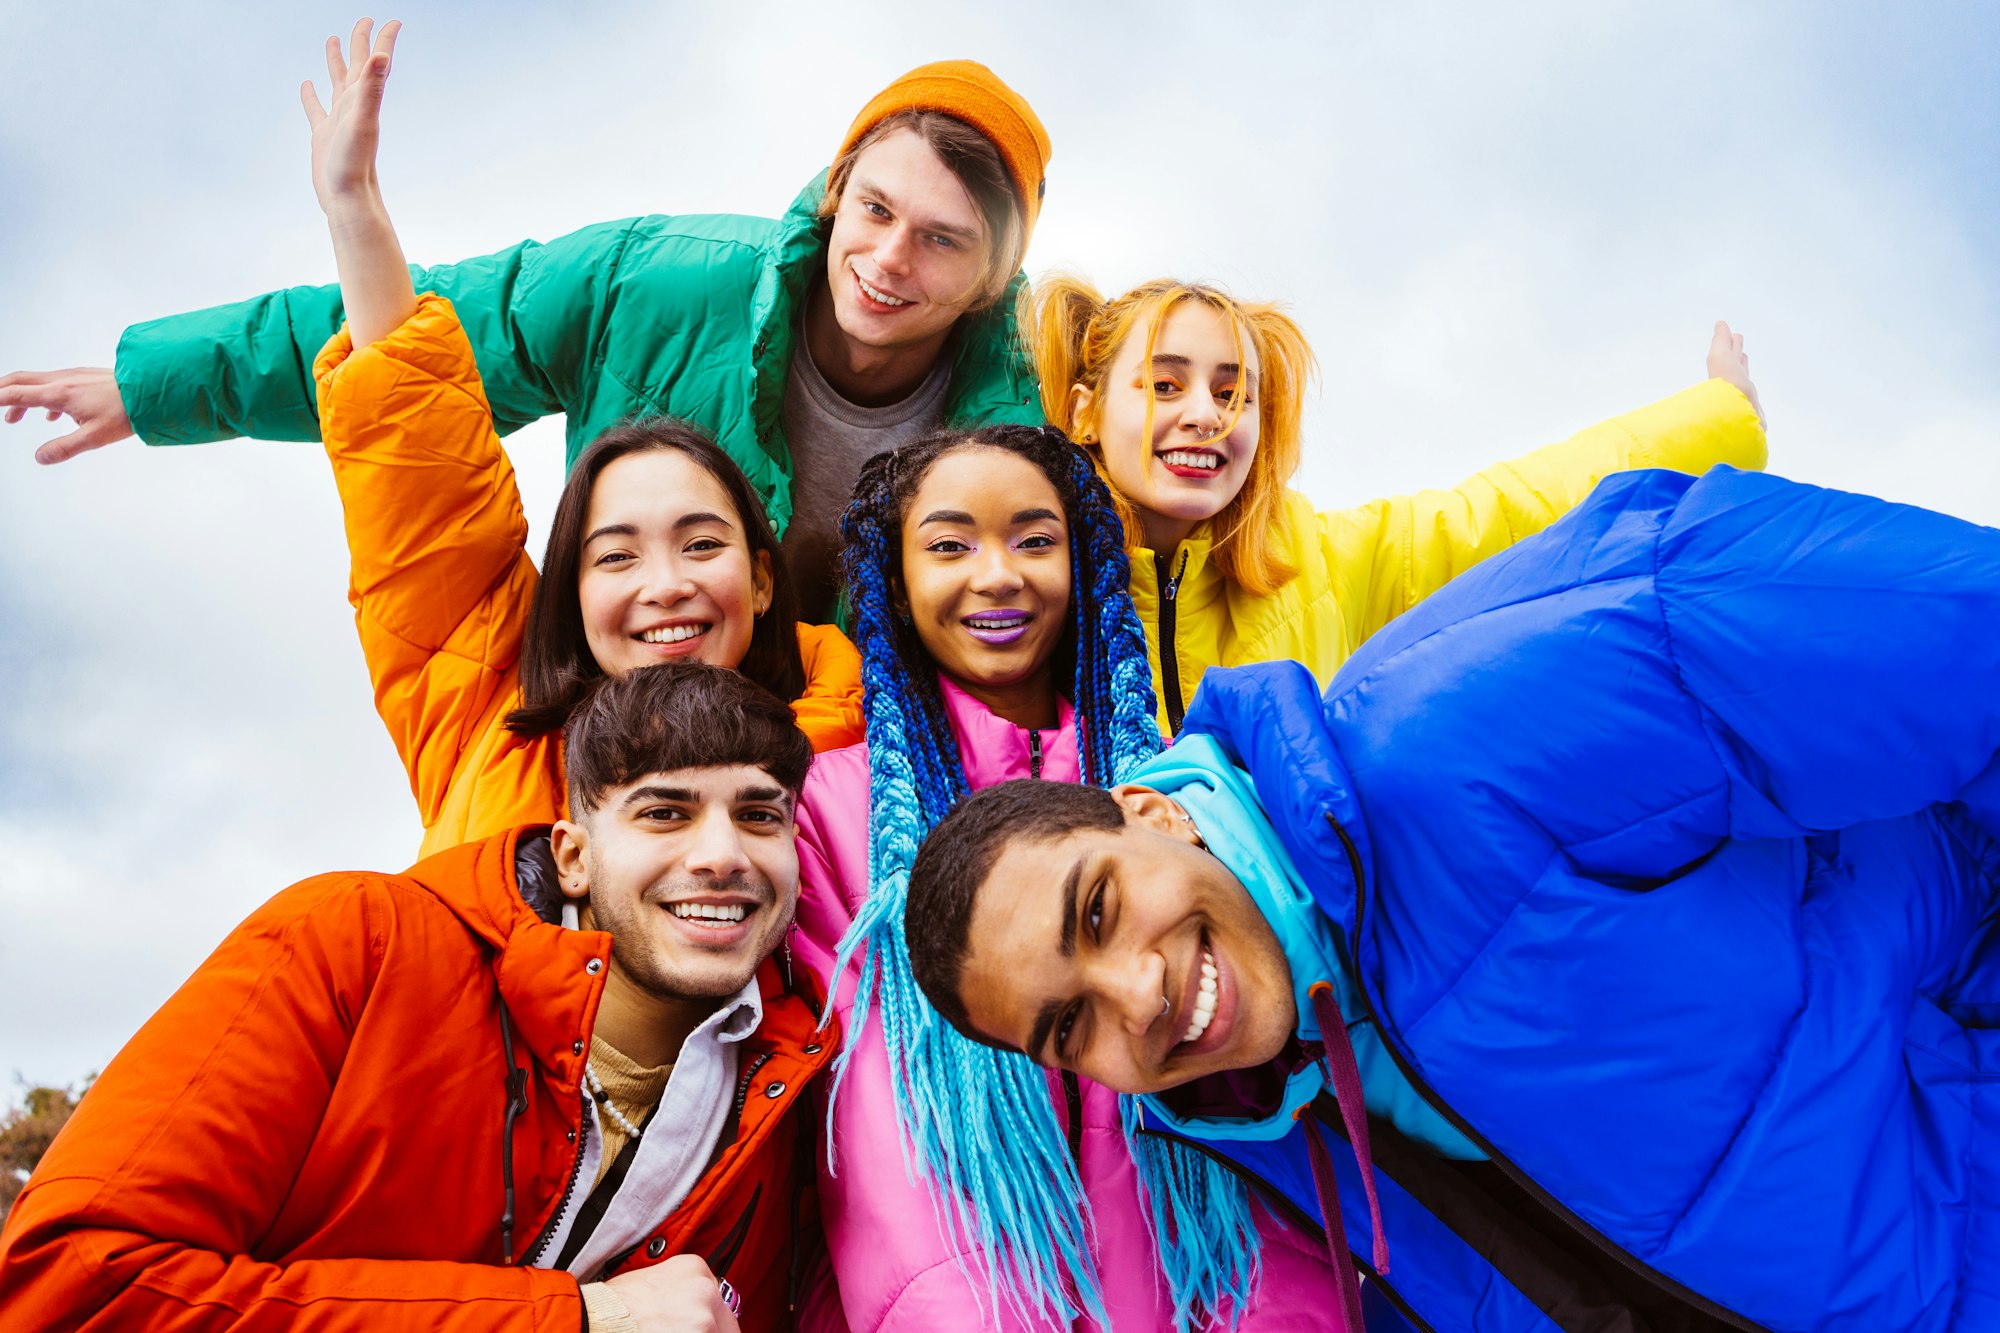 Multiracial group of young friends meeting outdoors in winter